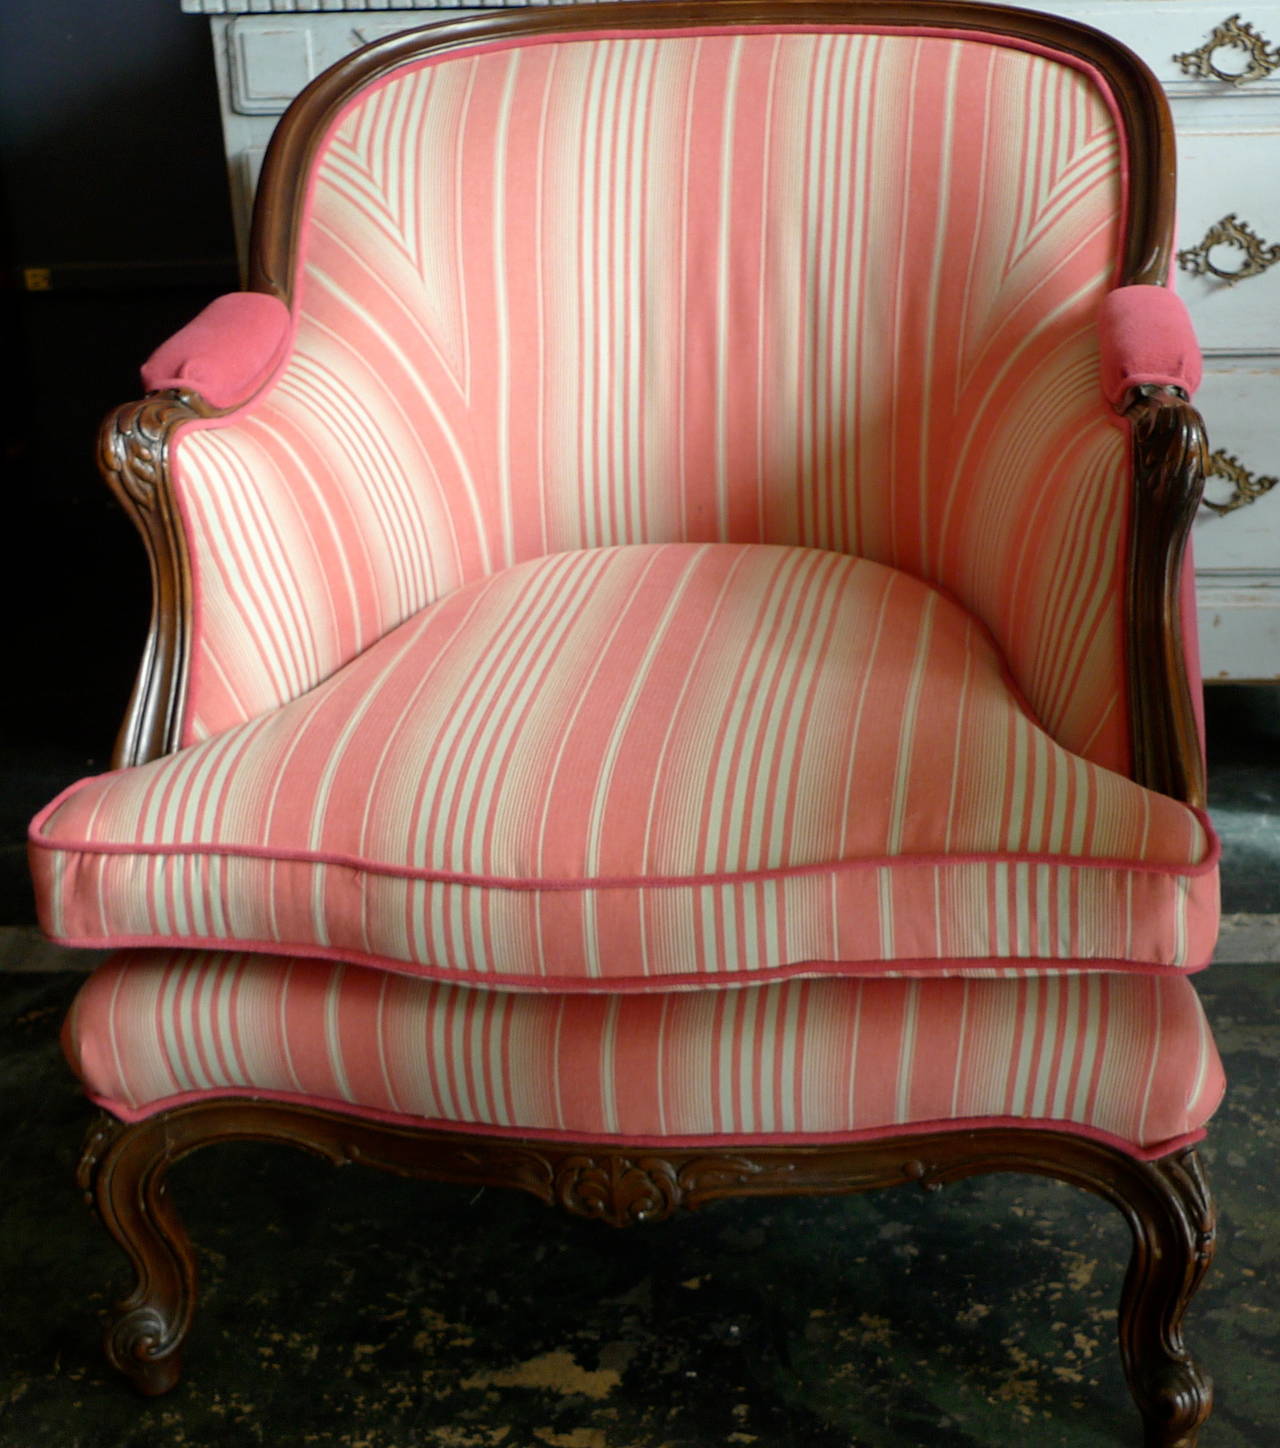 Stained French 19th Century Walnut Bergère Chair Re-Upholstered with New Fabric